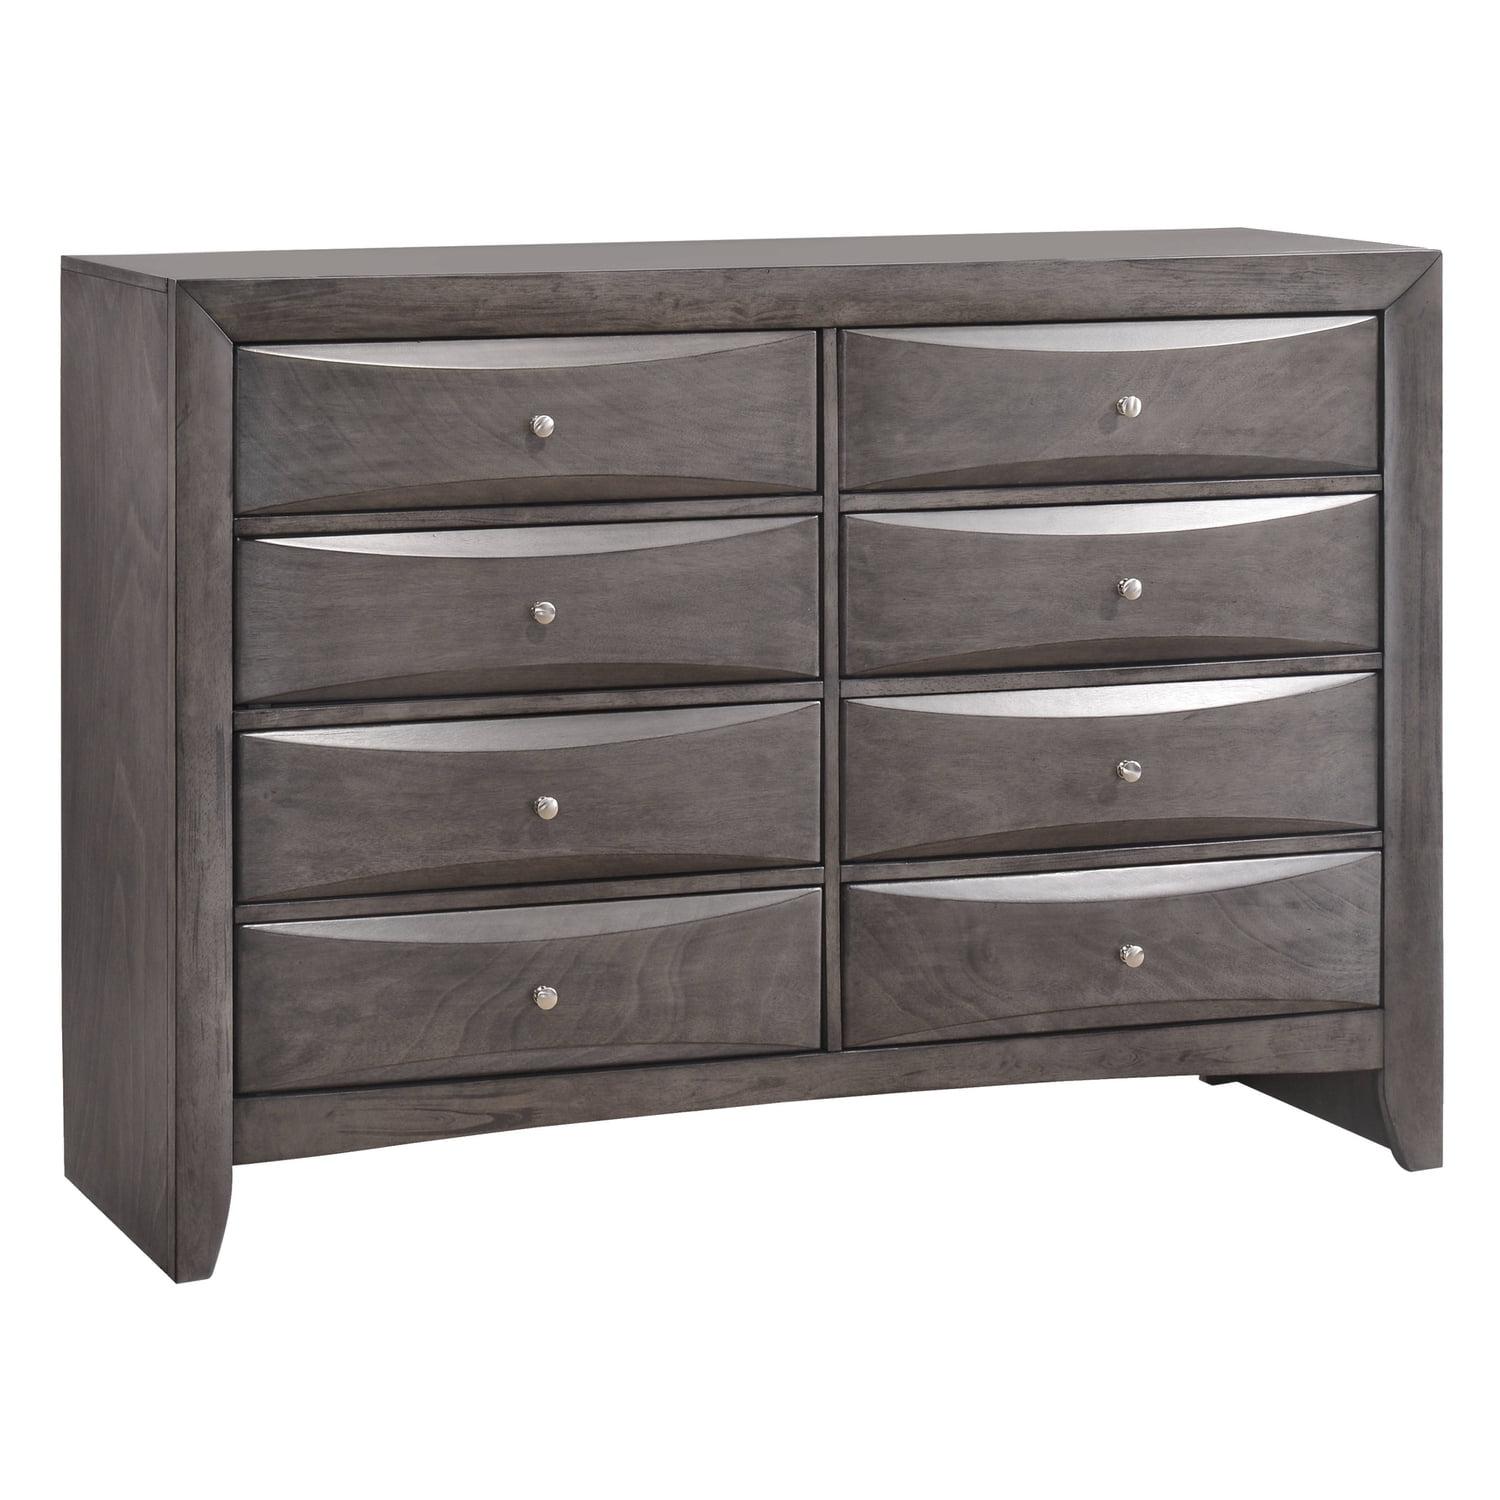 Transitional Gray 8-Drawer Dresser with Brushed Nickel Knobs